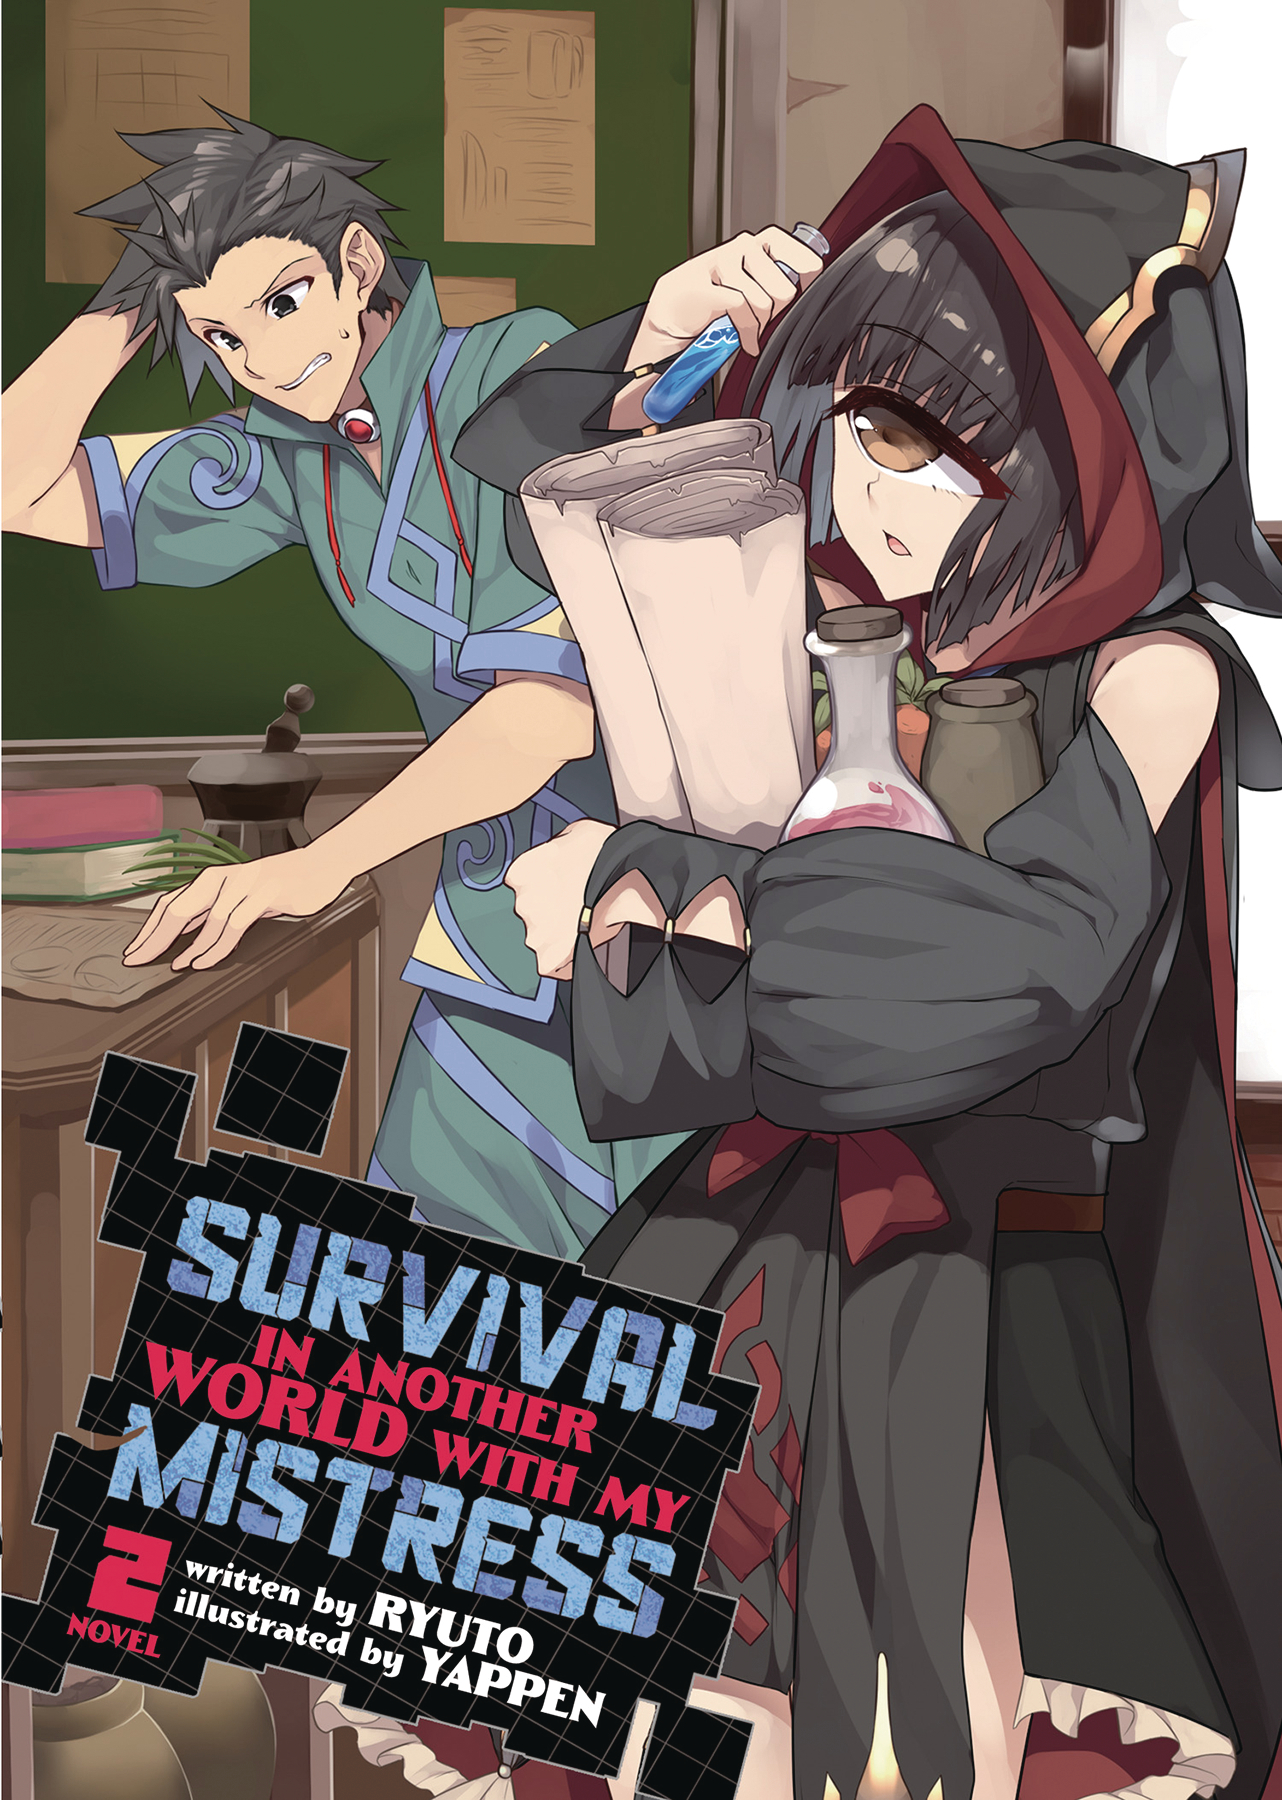 Survival In Another World with My Mistress! Light Novel Volume 2